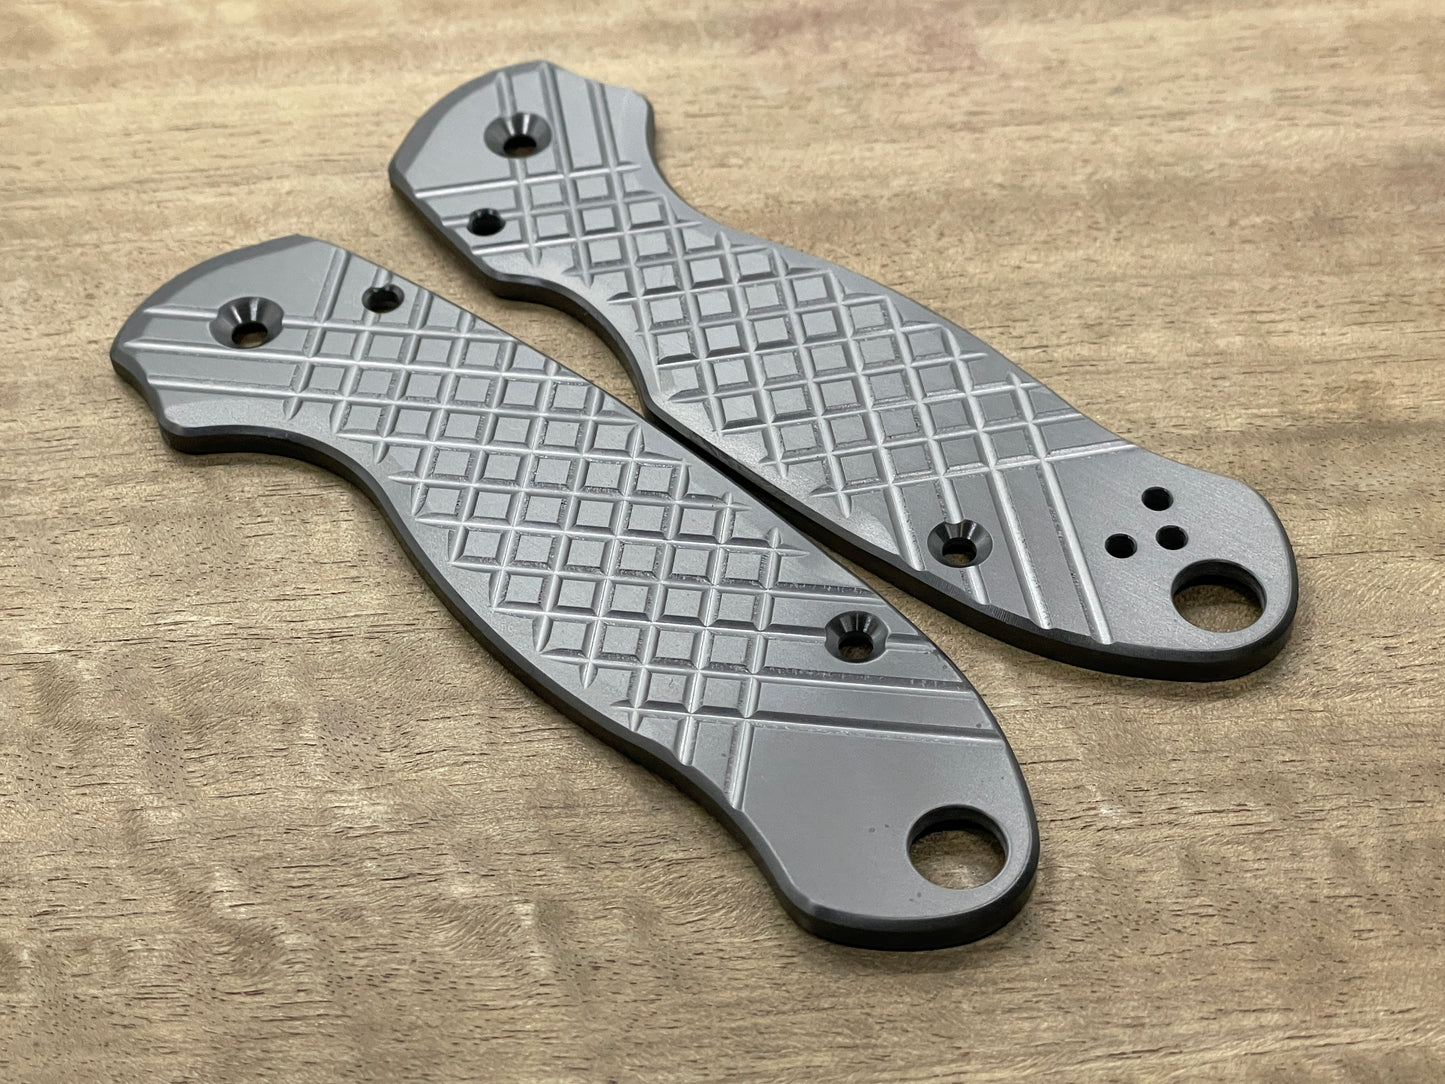 Brushed FRAG milled Zirconium scales for Spyderco Para 3